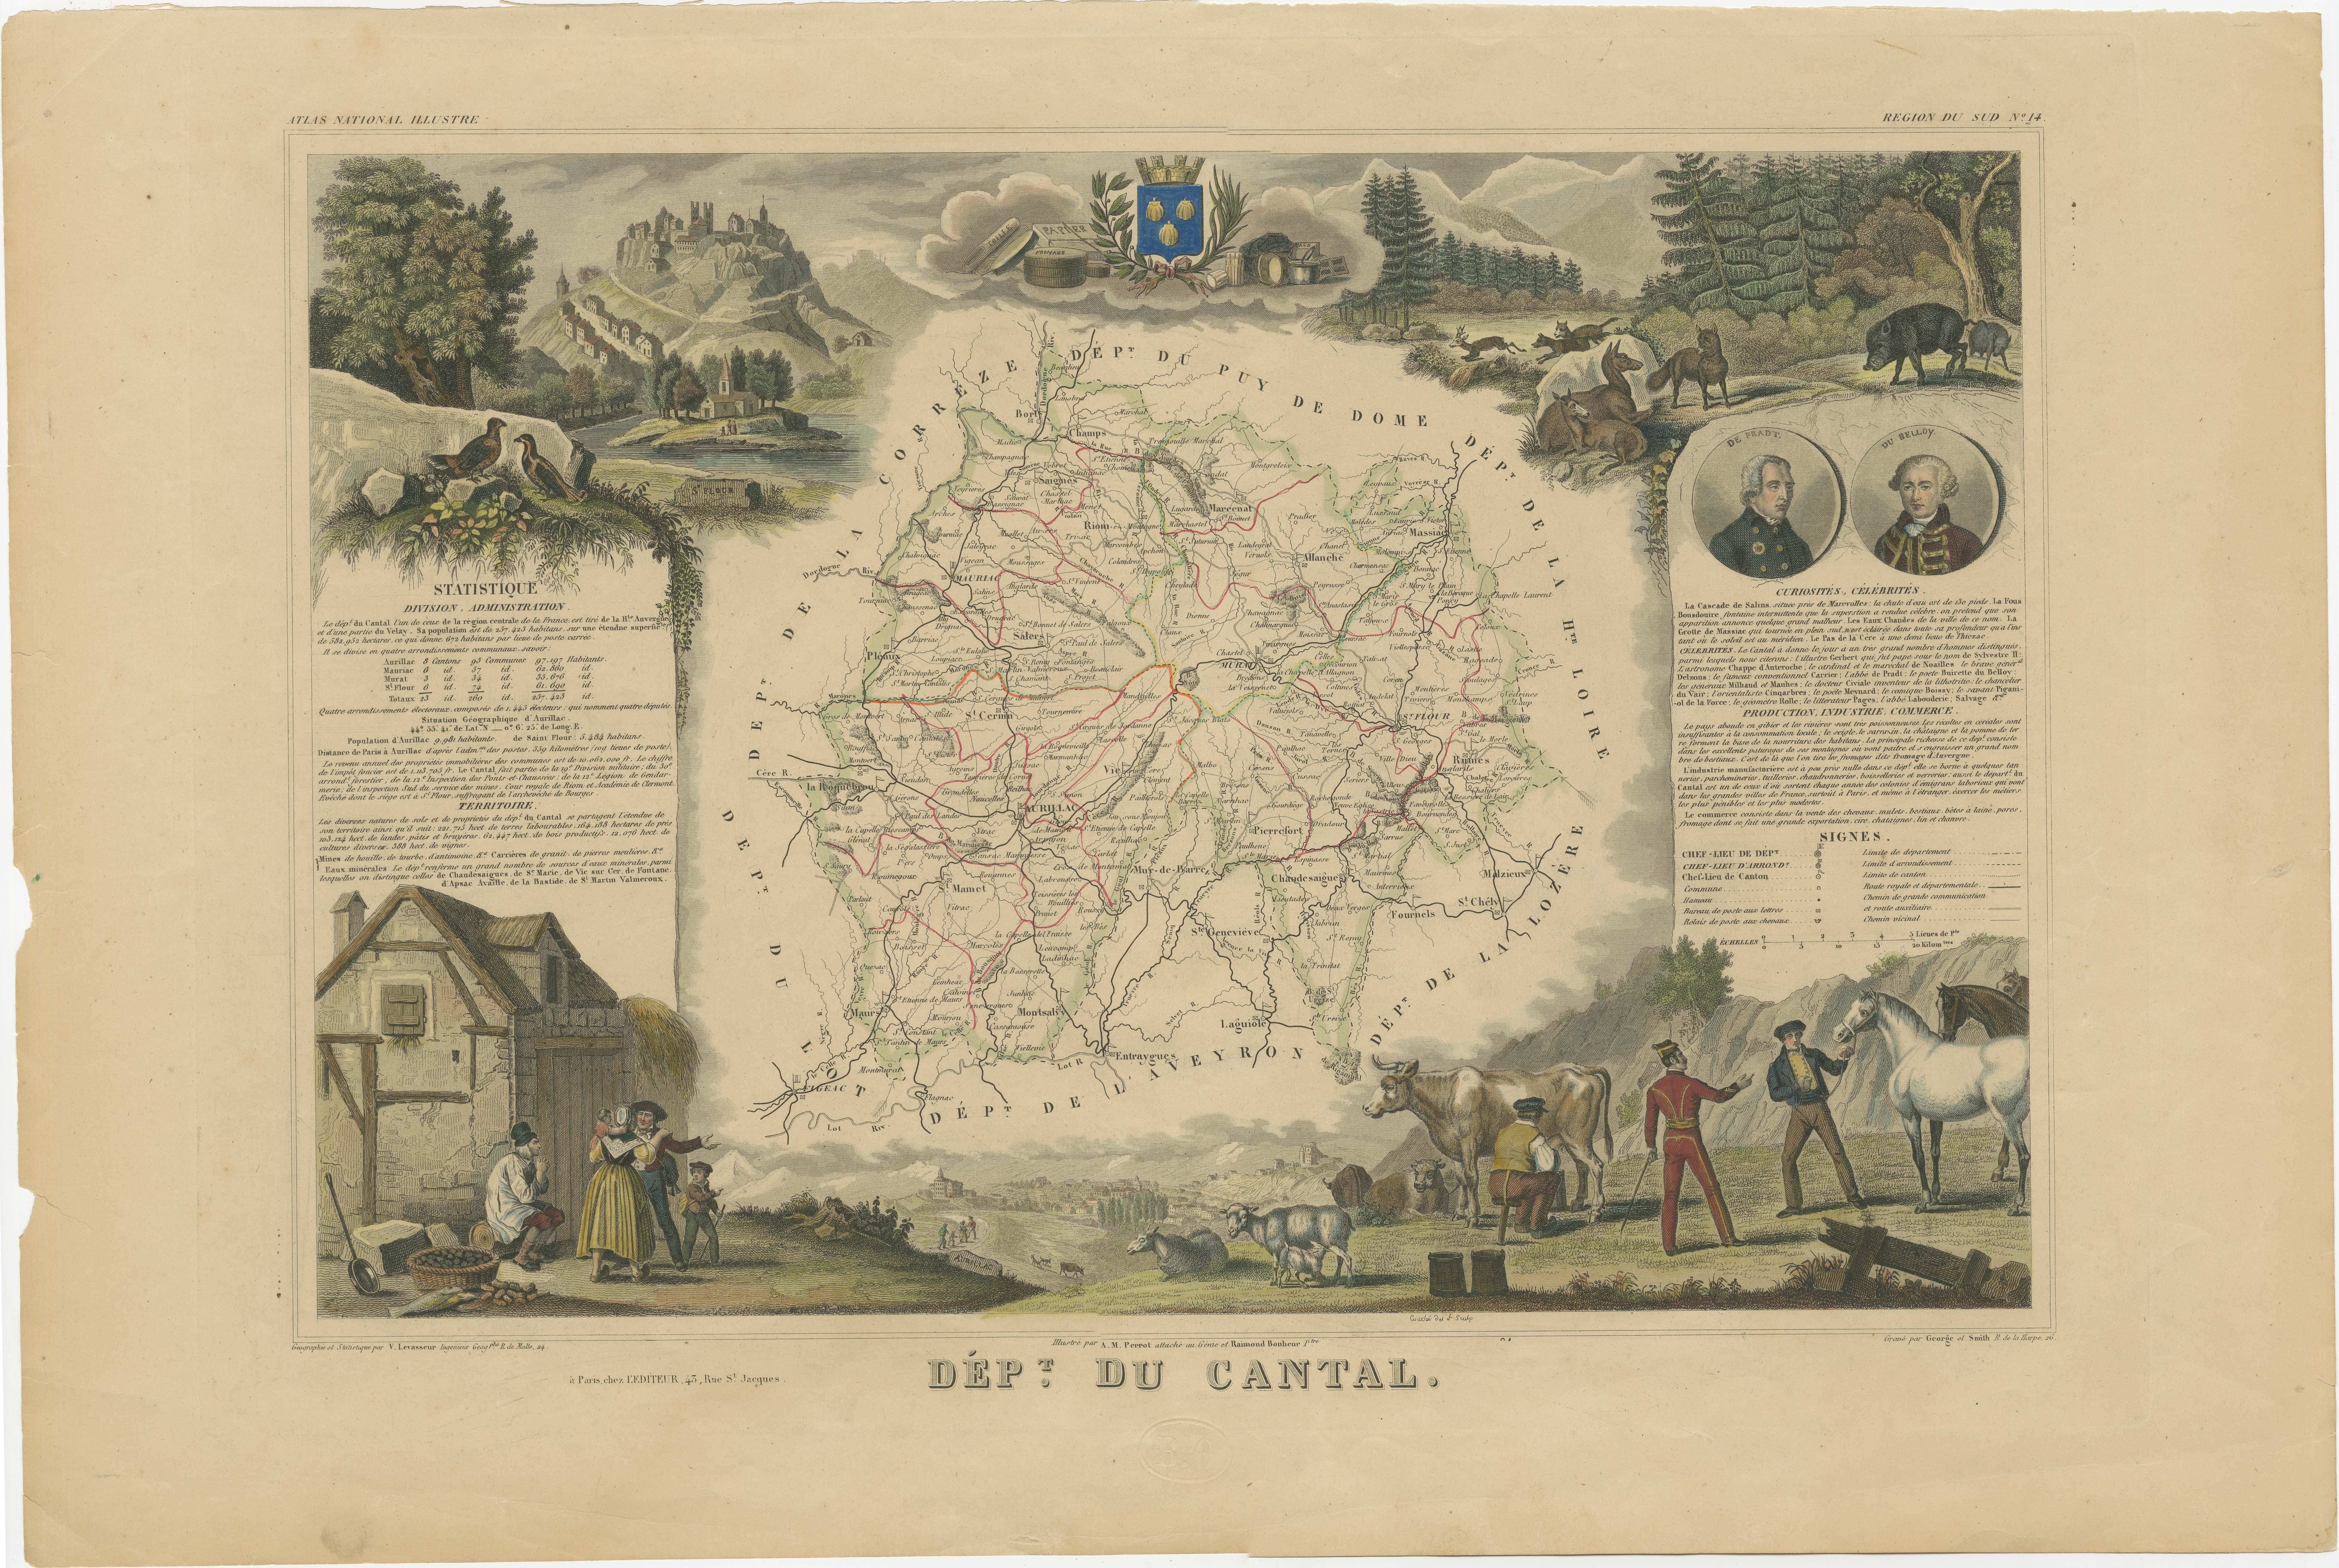 Antique map titled 'Dépt. du Cantal'. Map of the French department of Cantal, France. This area of France is known for its production of Cantal, a firm cheese, named after the region. The whole is surrounded by elaborate decorative engravings